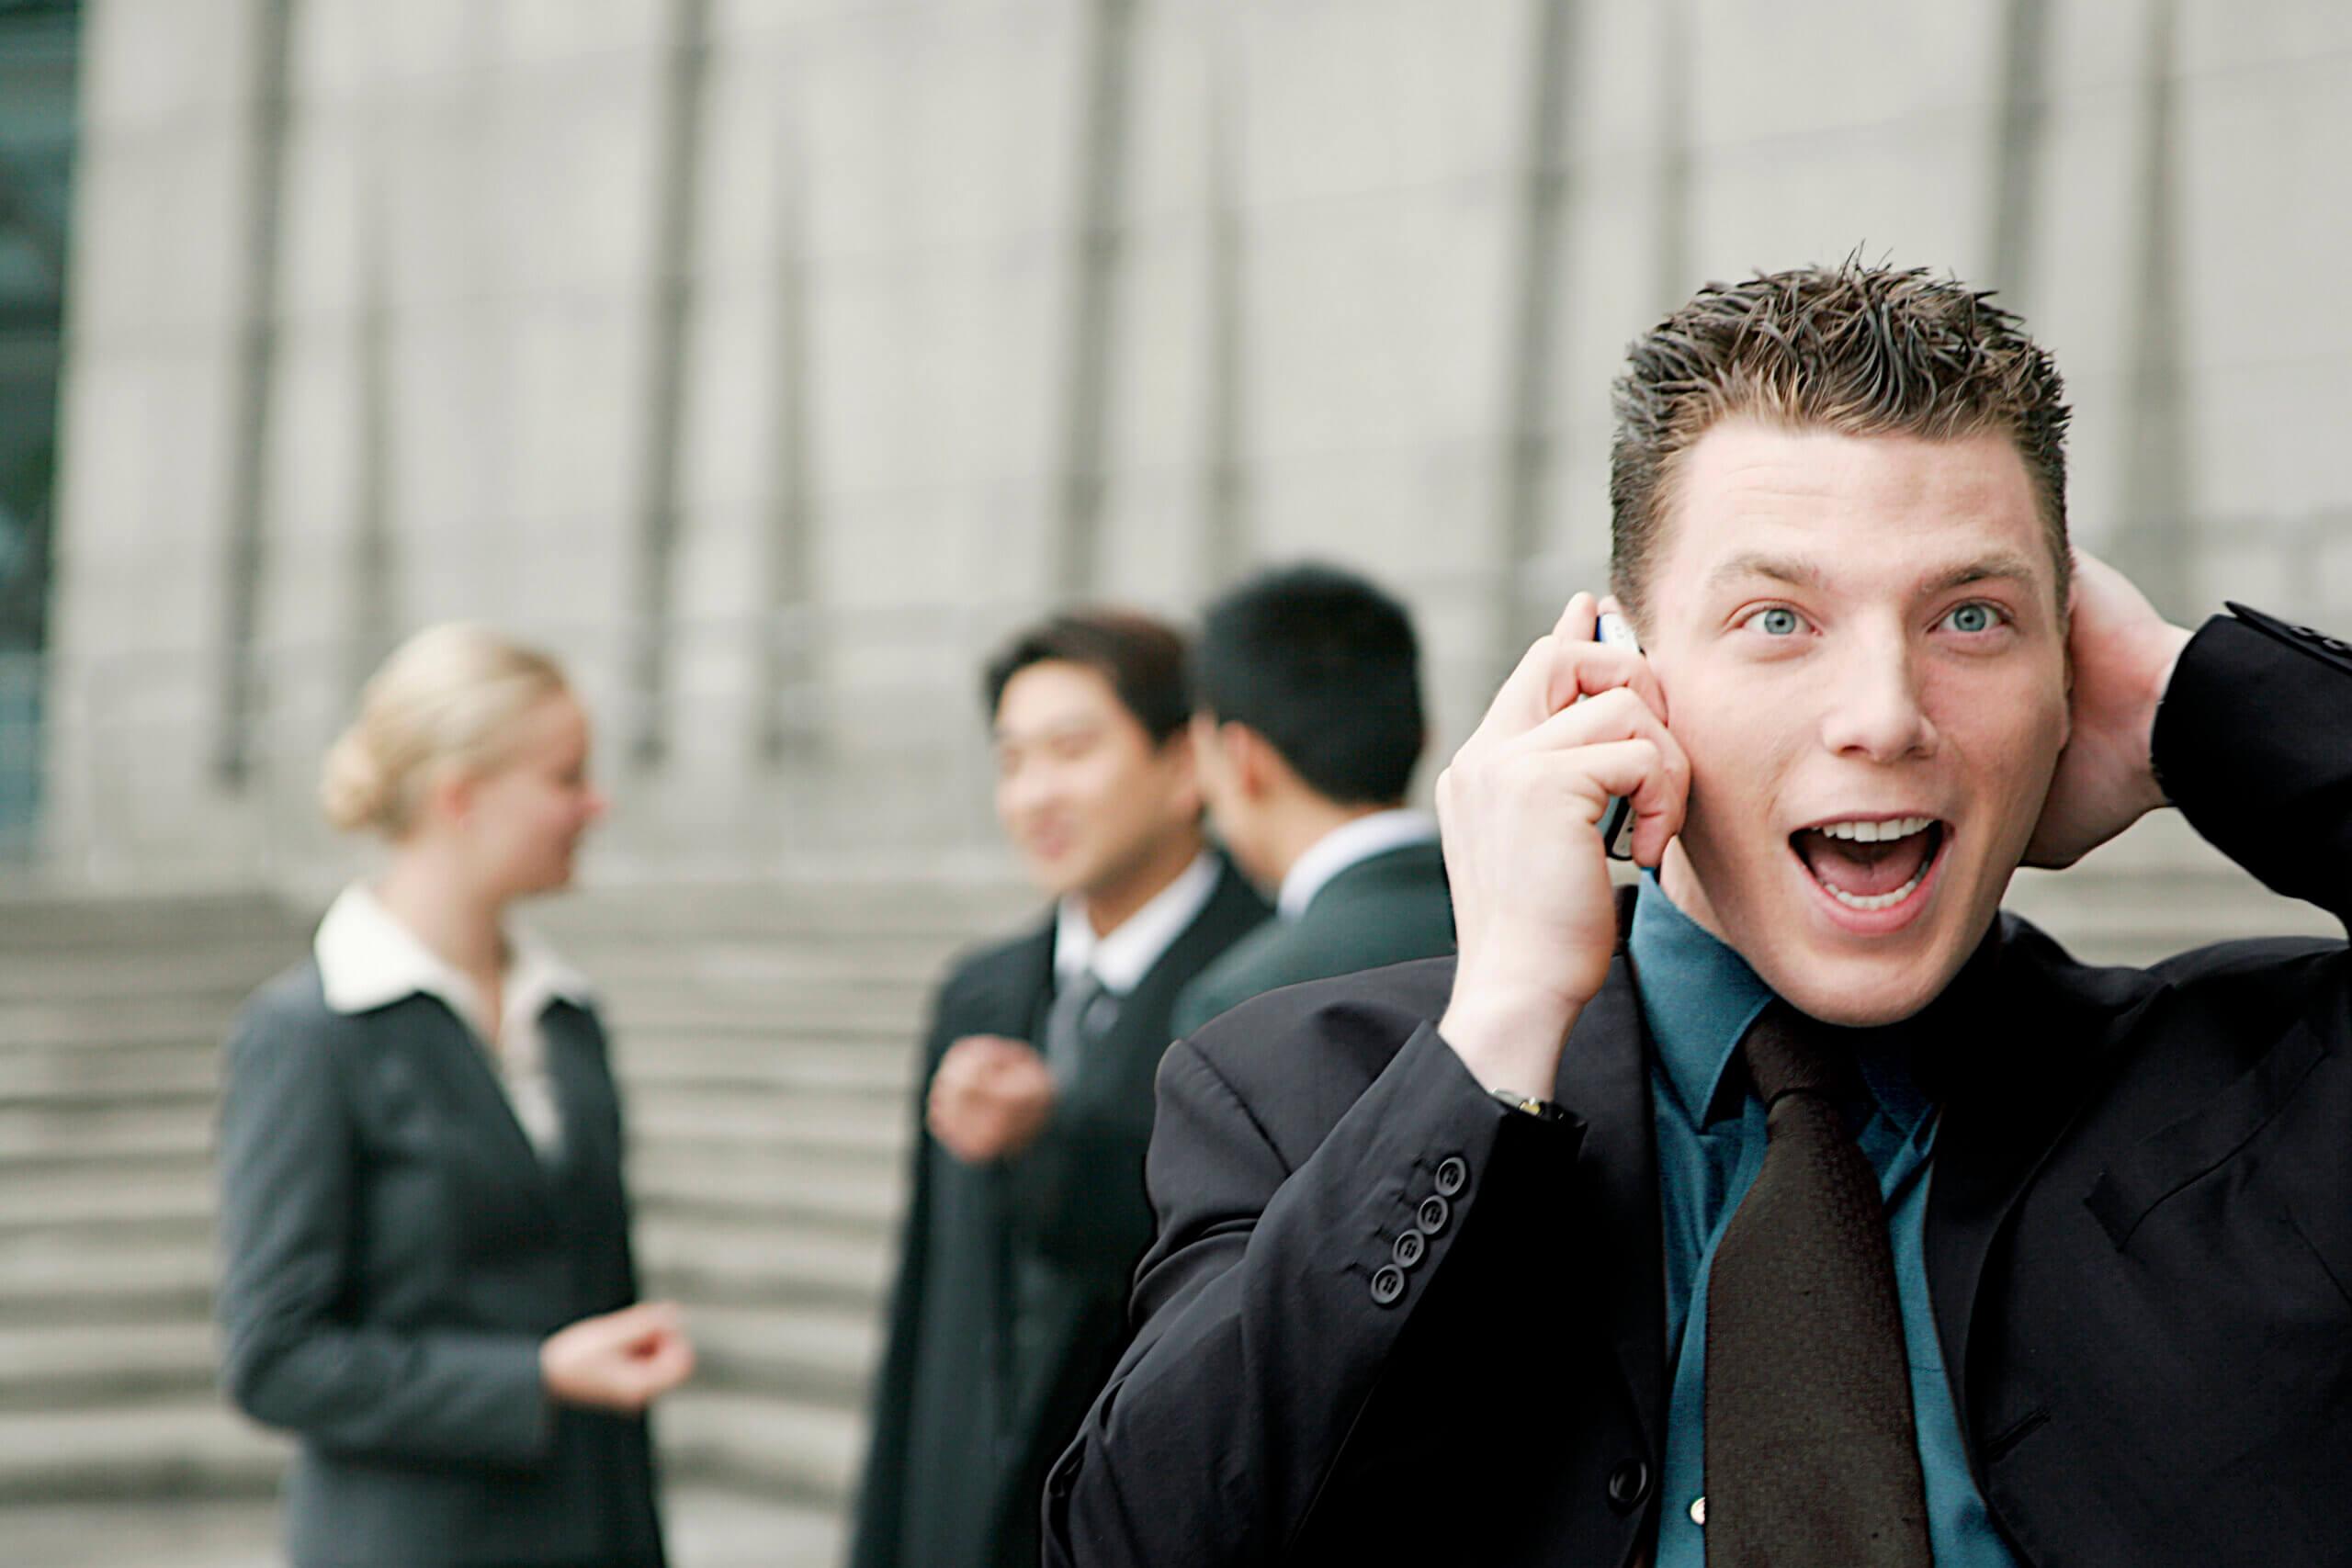 Prepare well before doing a telephone interview